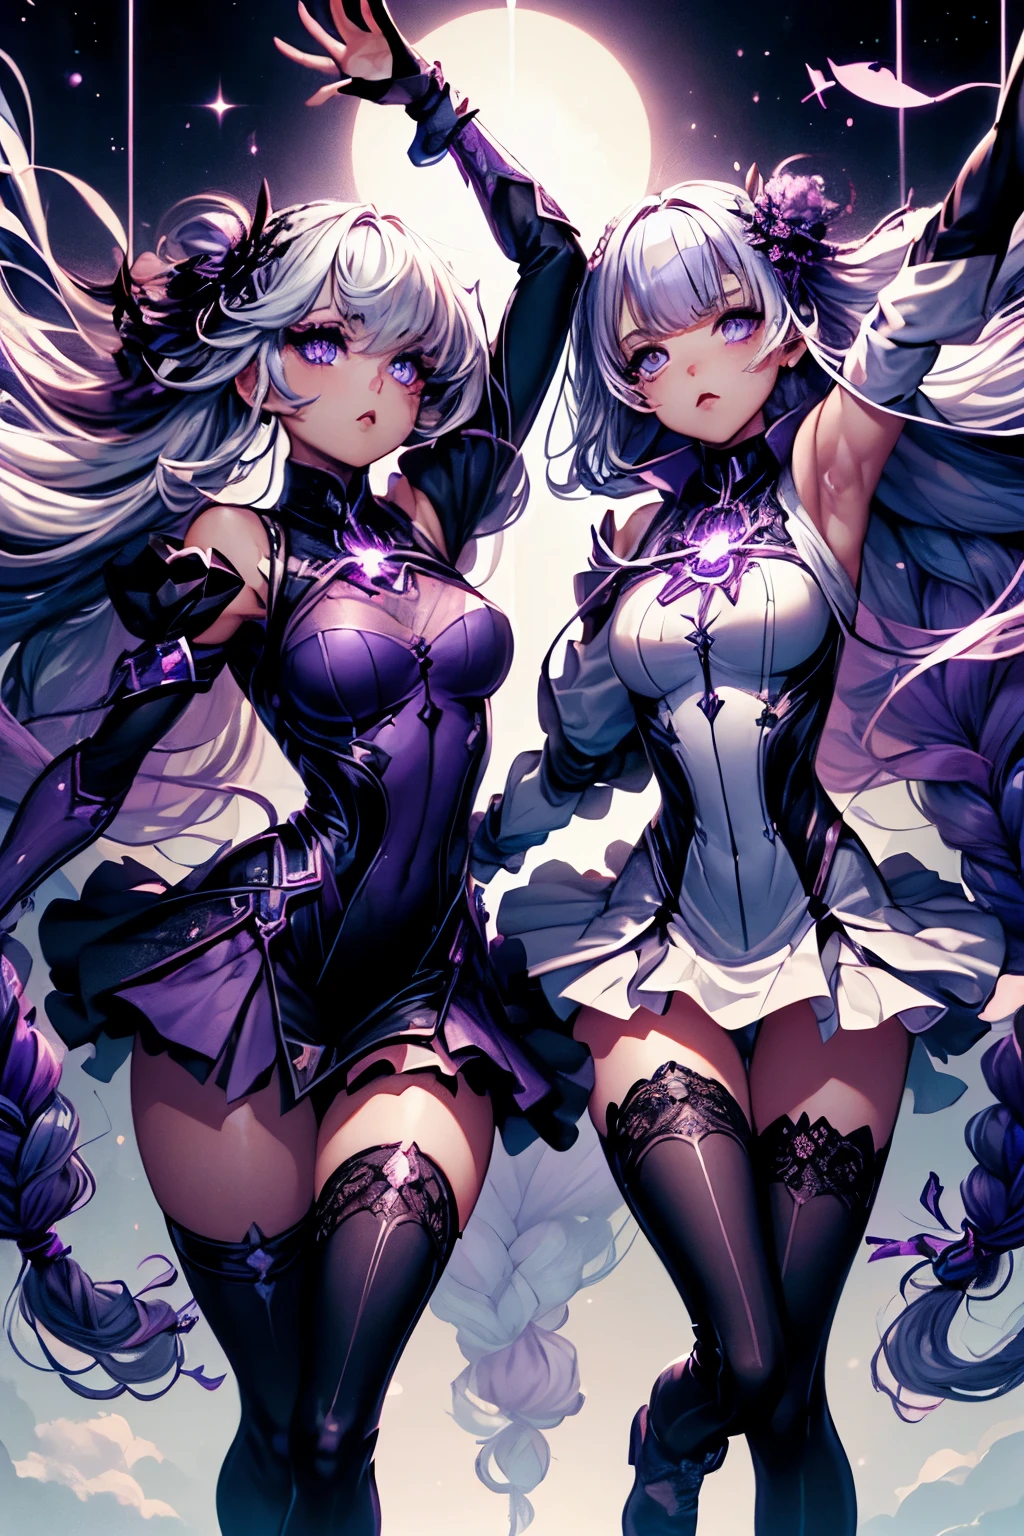 (ultra-detailed face, sleepy eyes:1.2), (2girls:1.3), (A mysterious girl and her friend are break dancing and jumping in a daring pose with their backs to each other:1.4), BREAK (Cryptic Girl has (long purple-white gradient hair), Hair braided in two large sections. She is indifferent, kind and has lavender eyes:1.3), BREAK (Cryptic Girl's friend has white hair, blunt bangs, a bob cut and lavender eyes:1.1), BREAK (The girl is wearing a futuristic outfit with lace and frills and a mini-skirt), BREAK (In the background, in space, mysterious cryptograms and a glowing key can be seen)